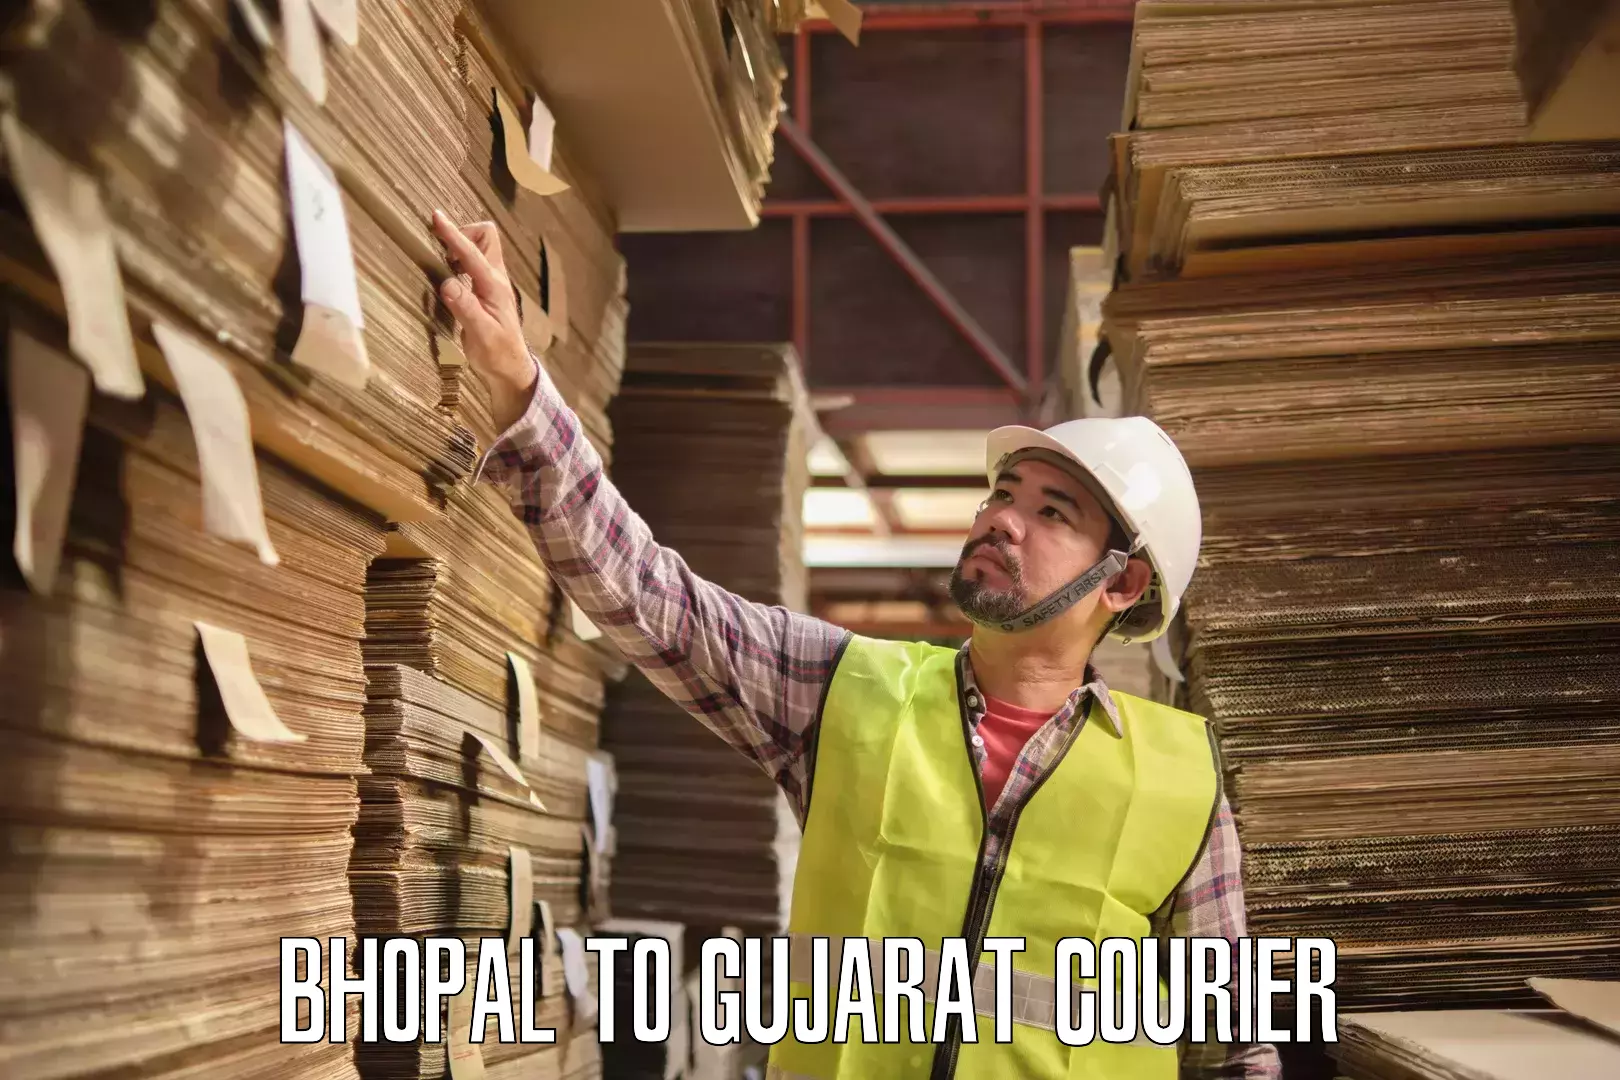 Professional courier services Bhopal to Surat